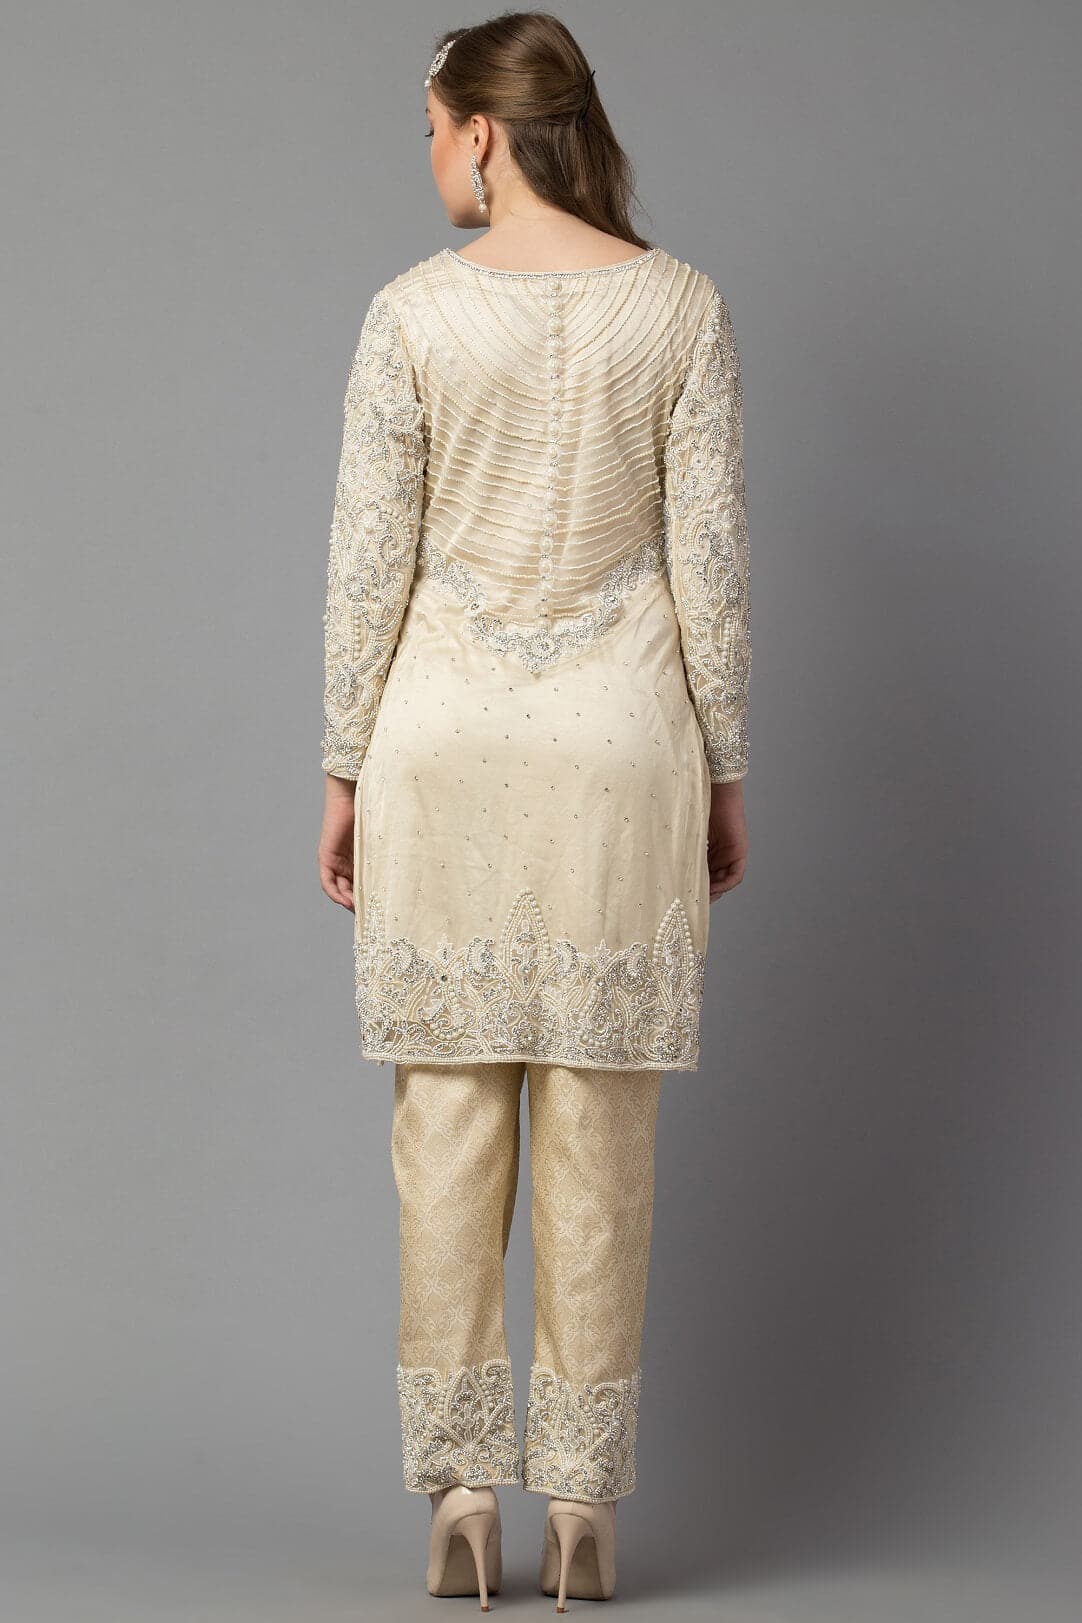 Ivory beads suit